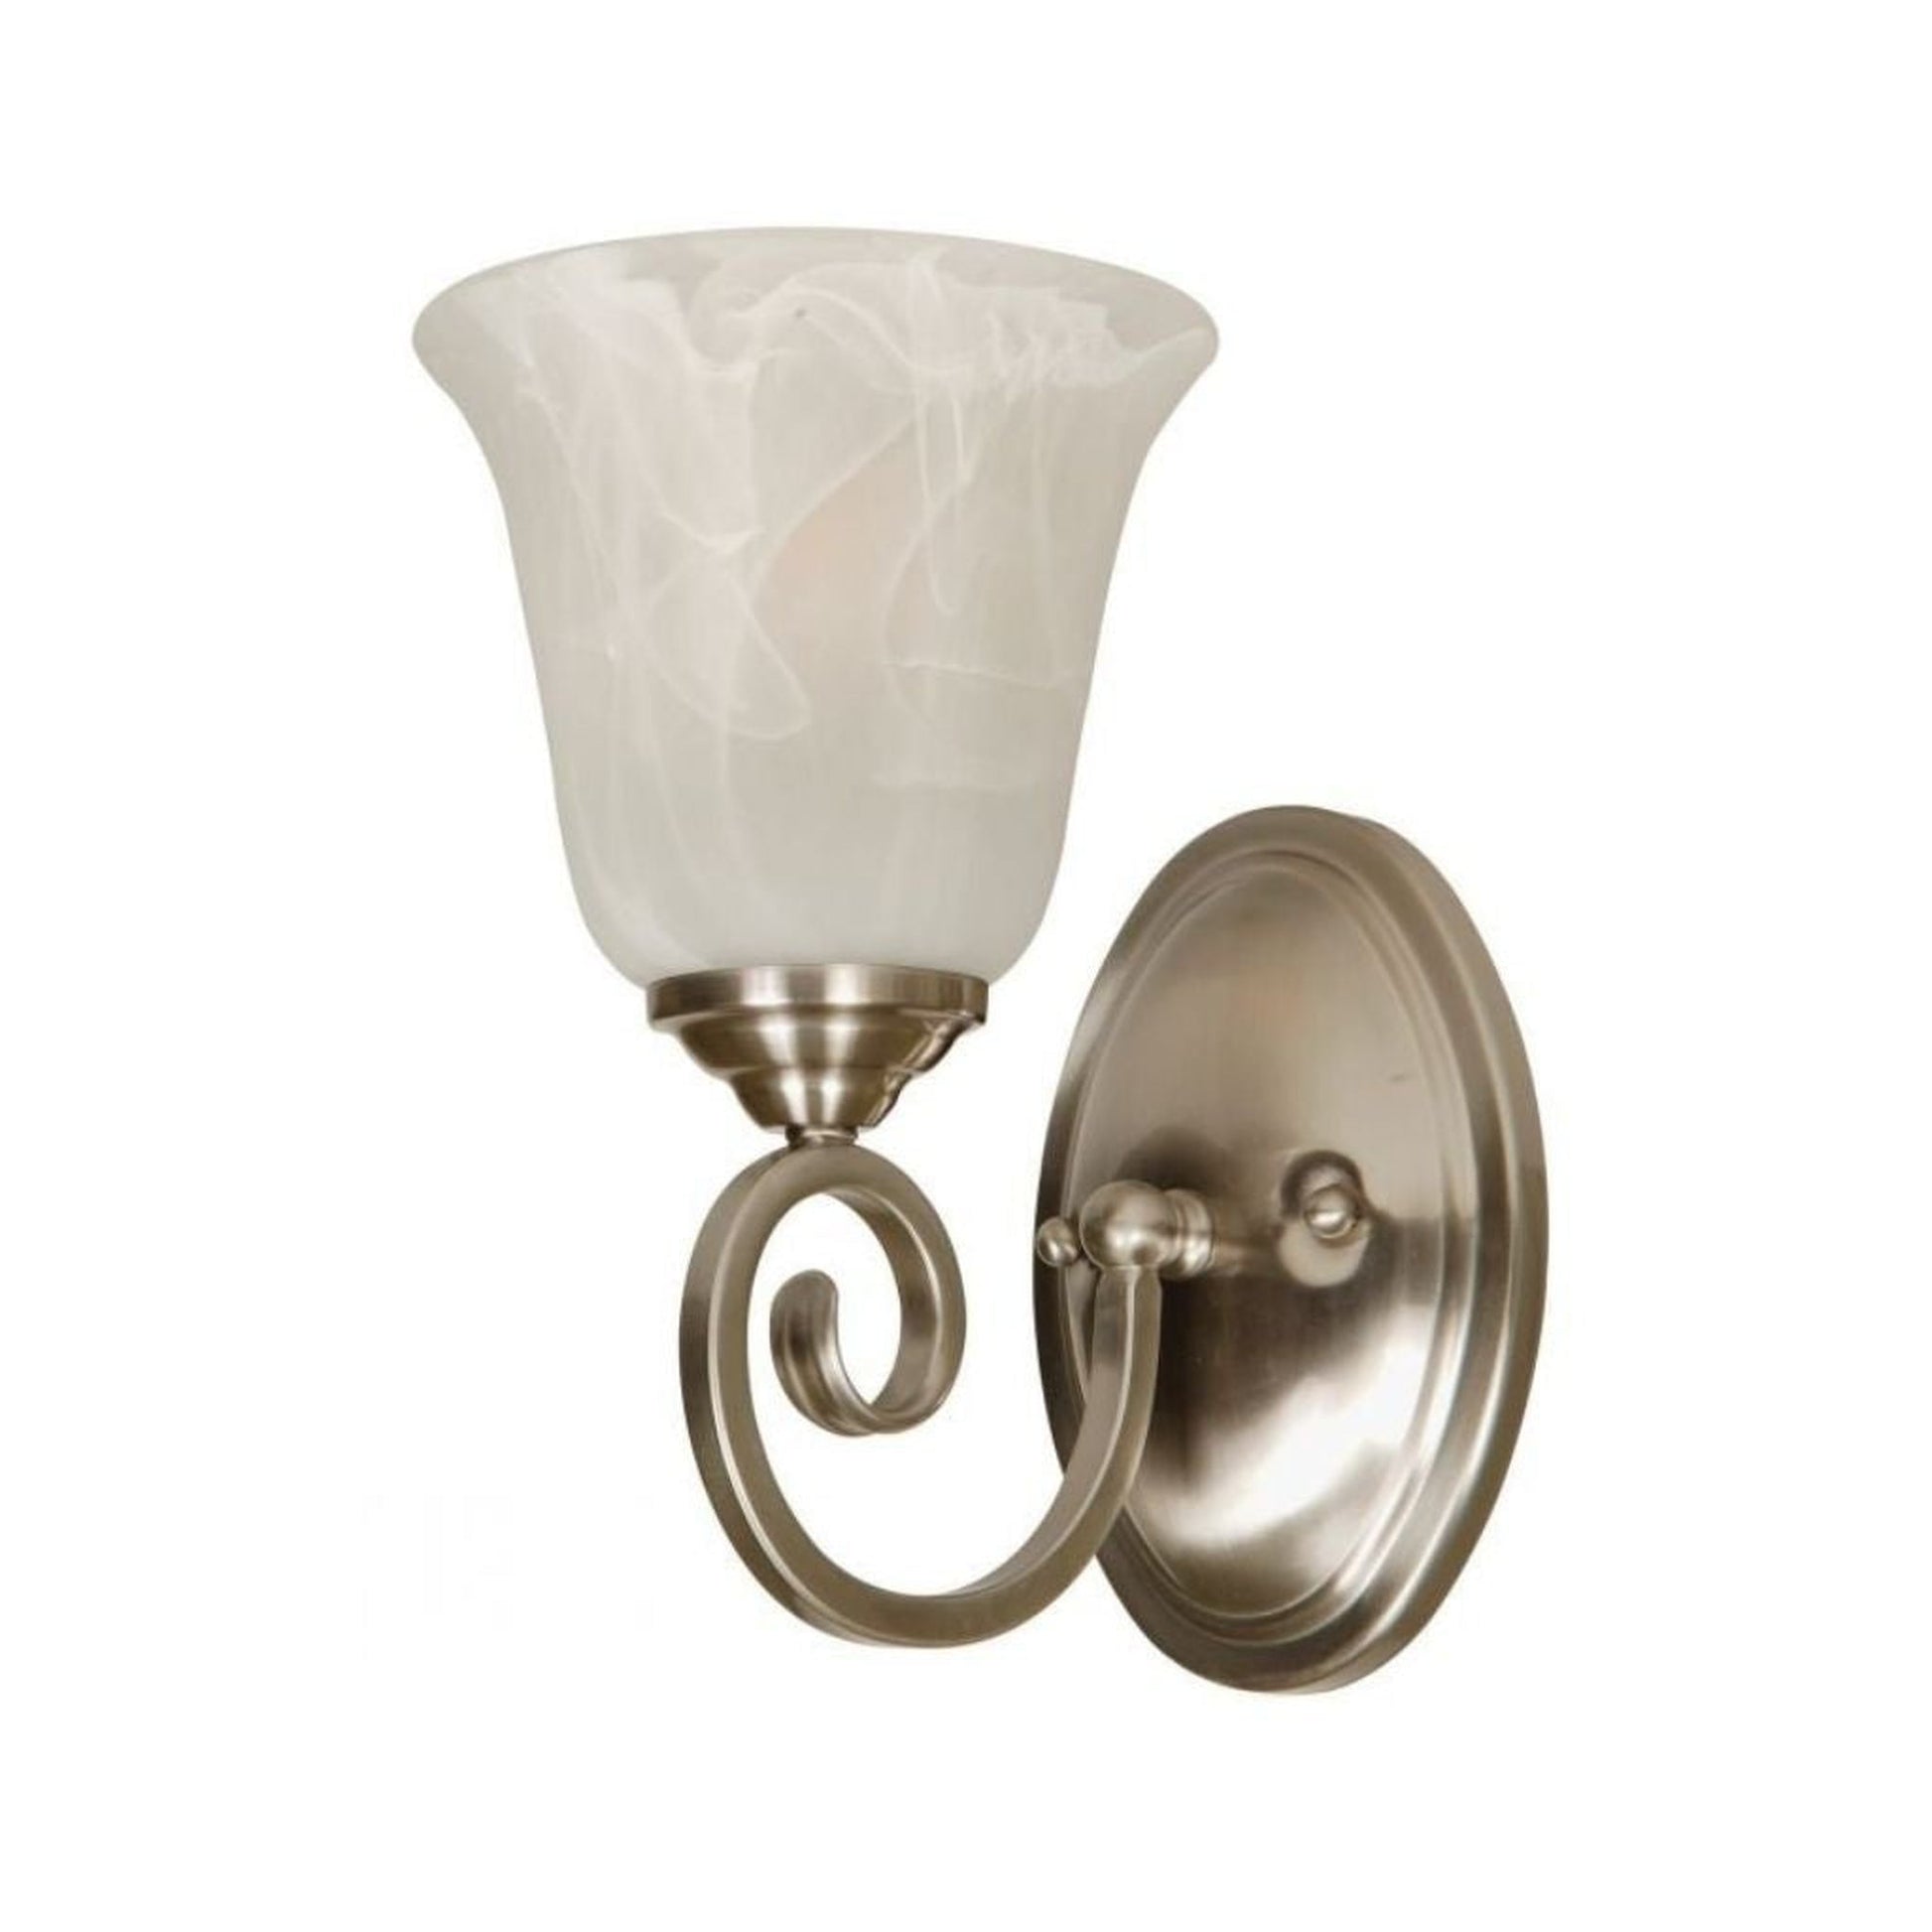 Craftmade Cecilia 6" x 11" 1-Light Brushed Polished Nickel Wall Sconce With Alabaster Glass Shade